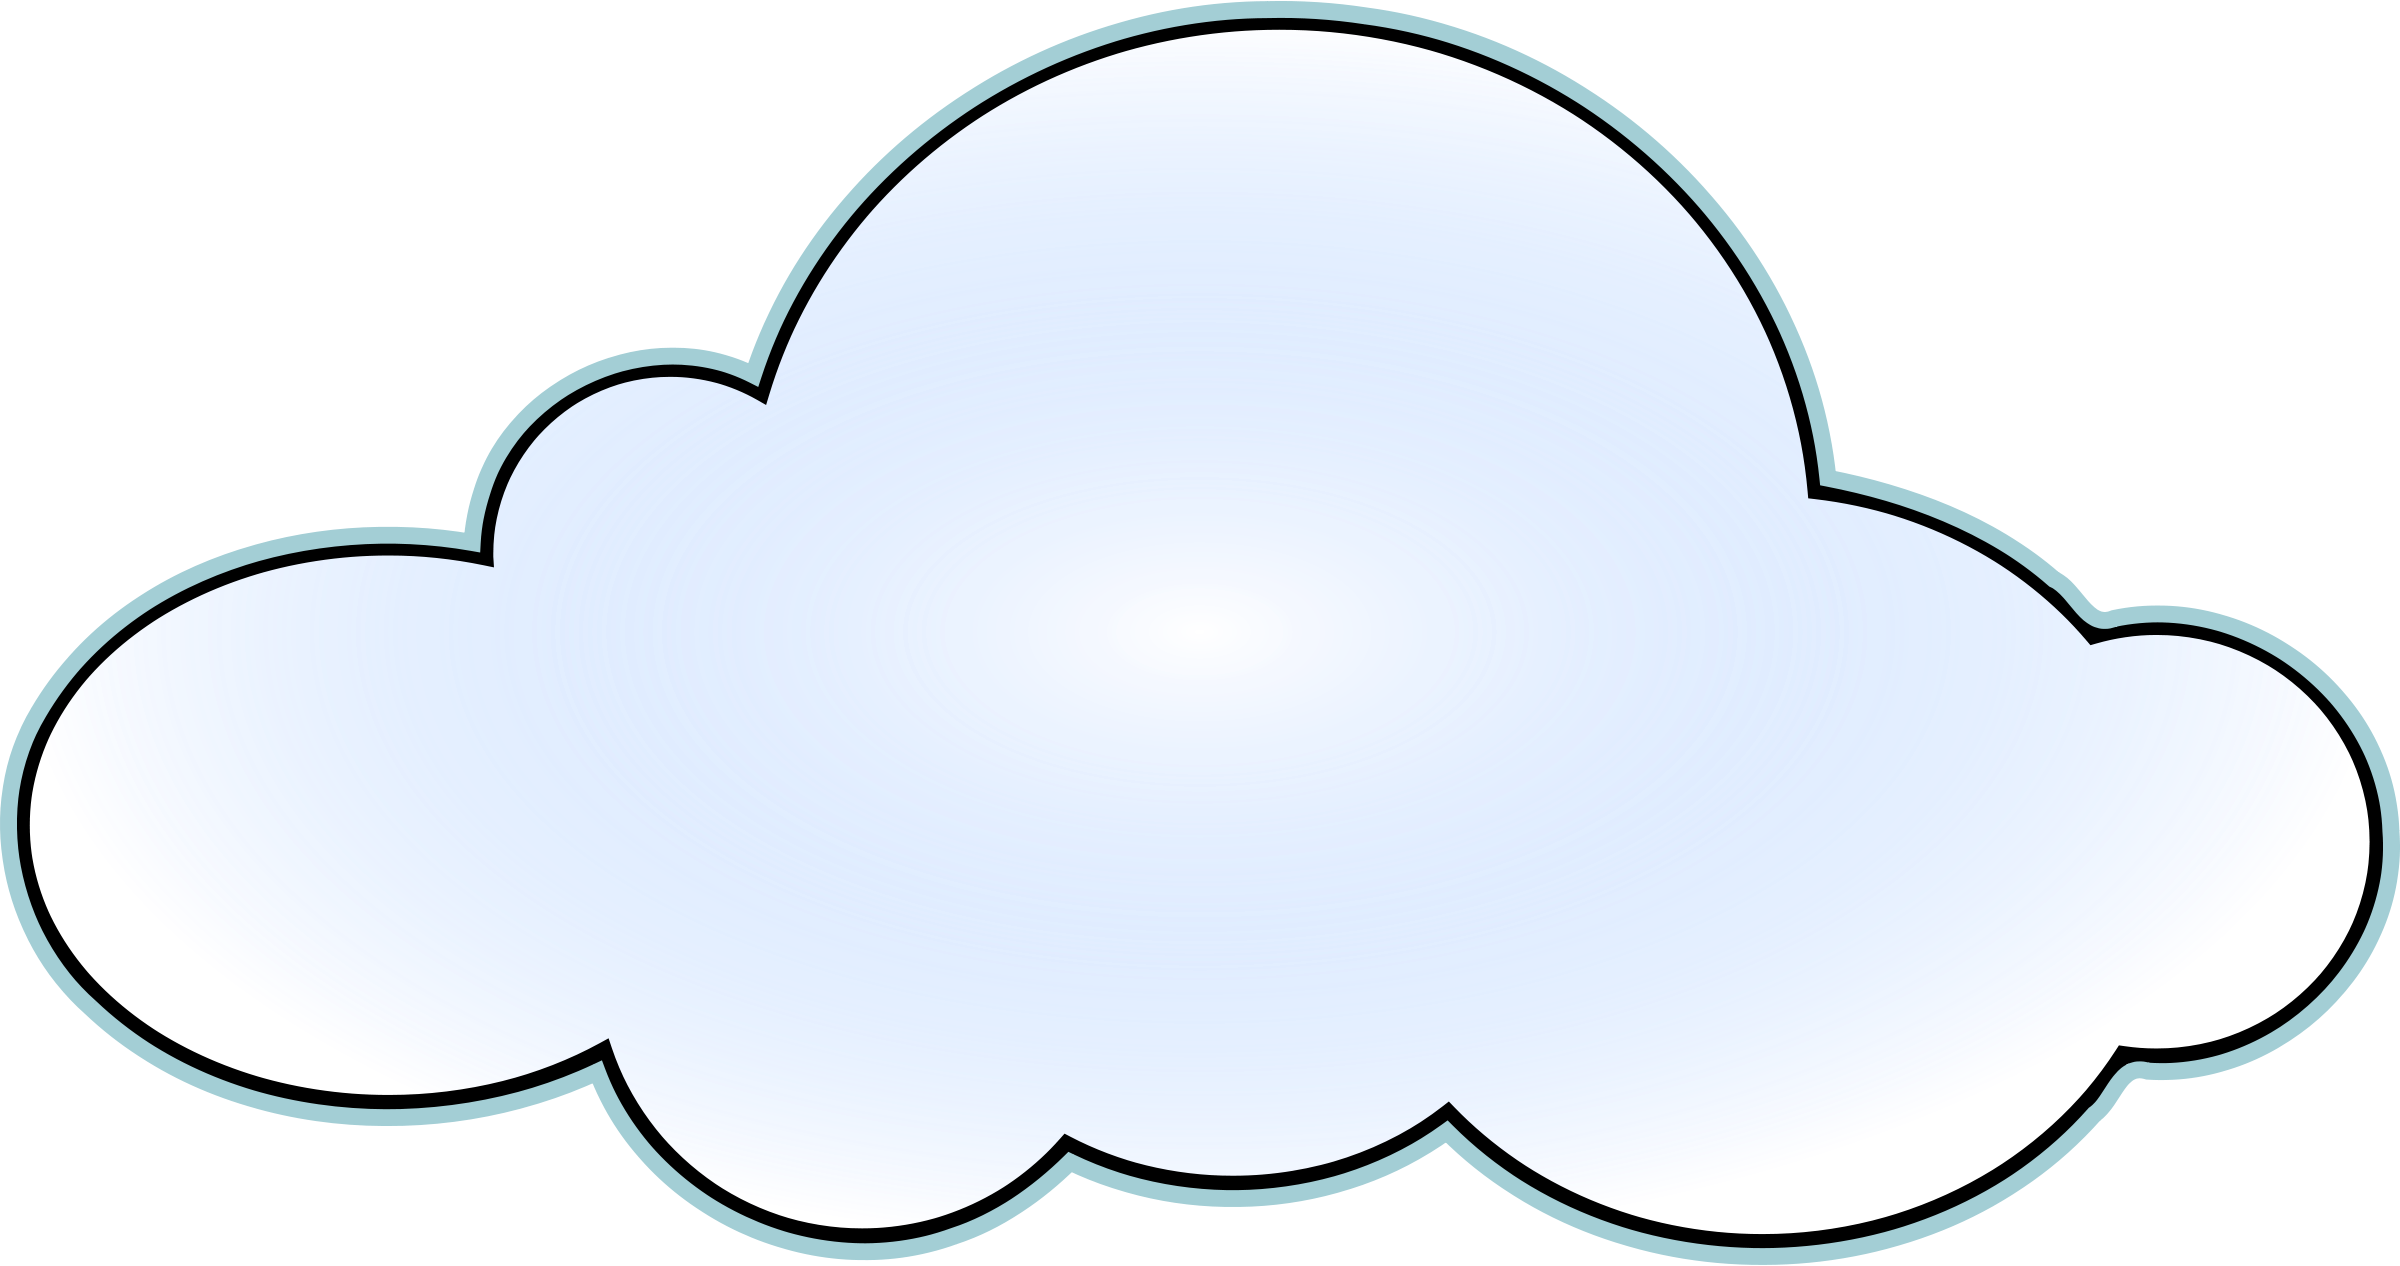 Blue white clouds clipart - Clipground